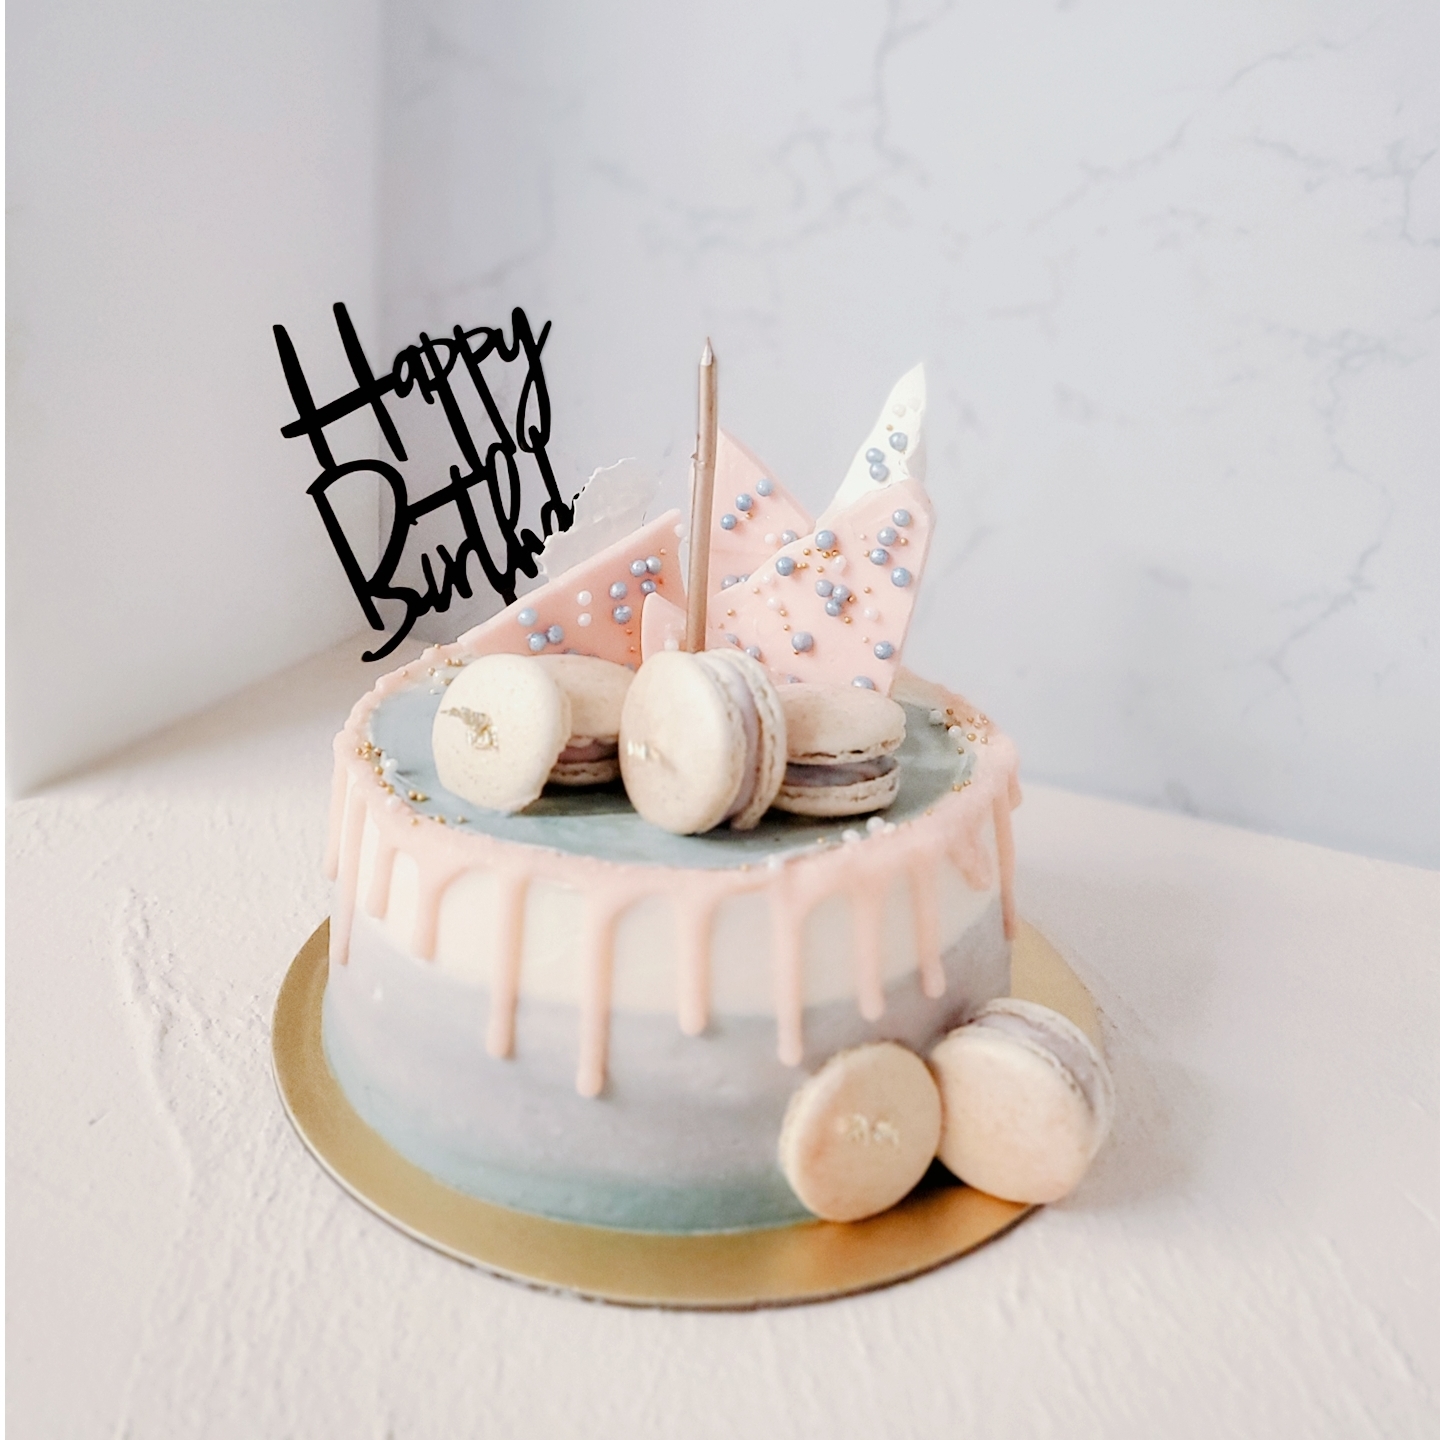 Ombre Drip Cake With Macarons & Chocolate Decor